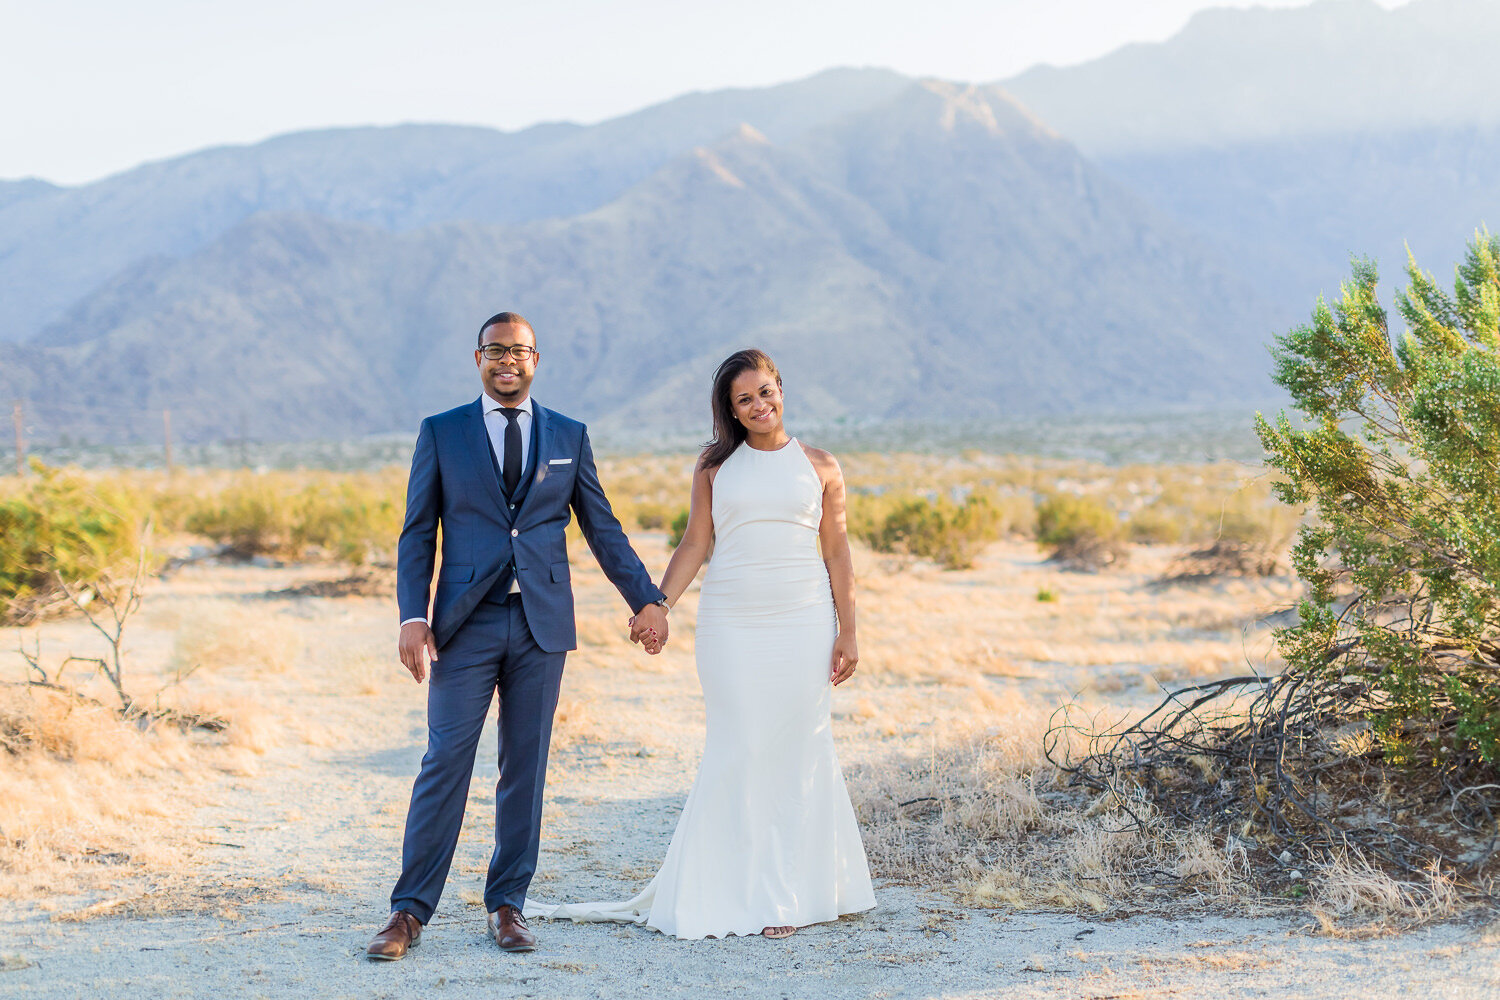 sevelle.elopement.palm.springs.sign.monocle.project-130.jpg